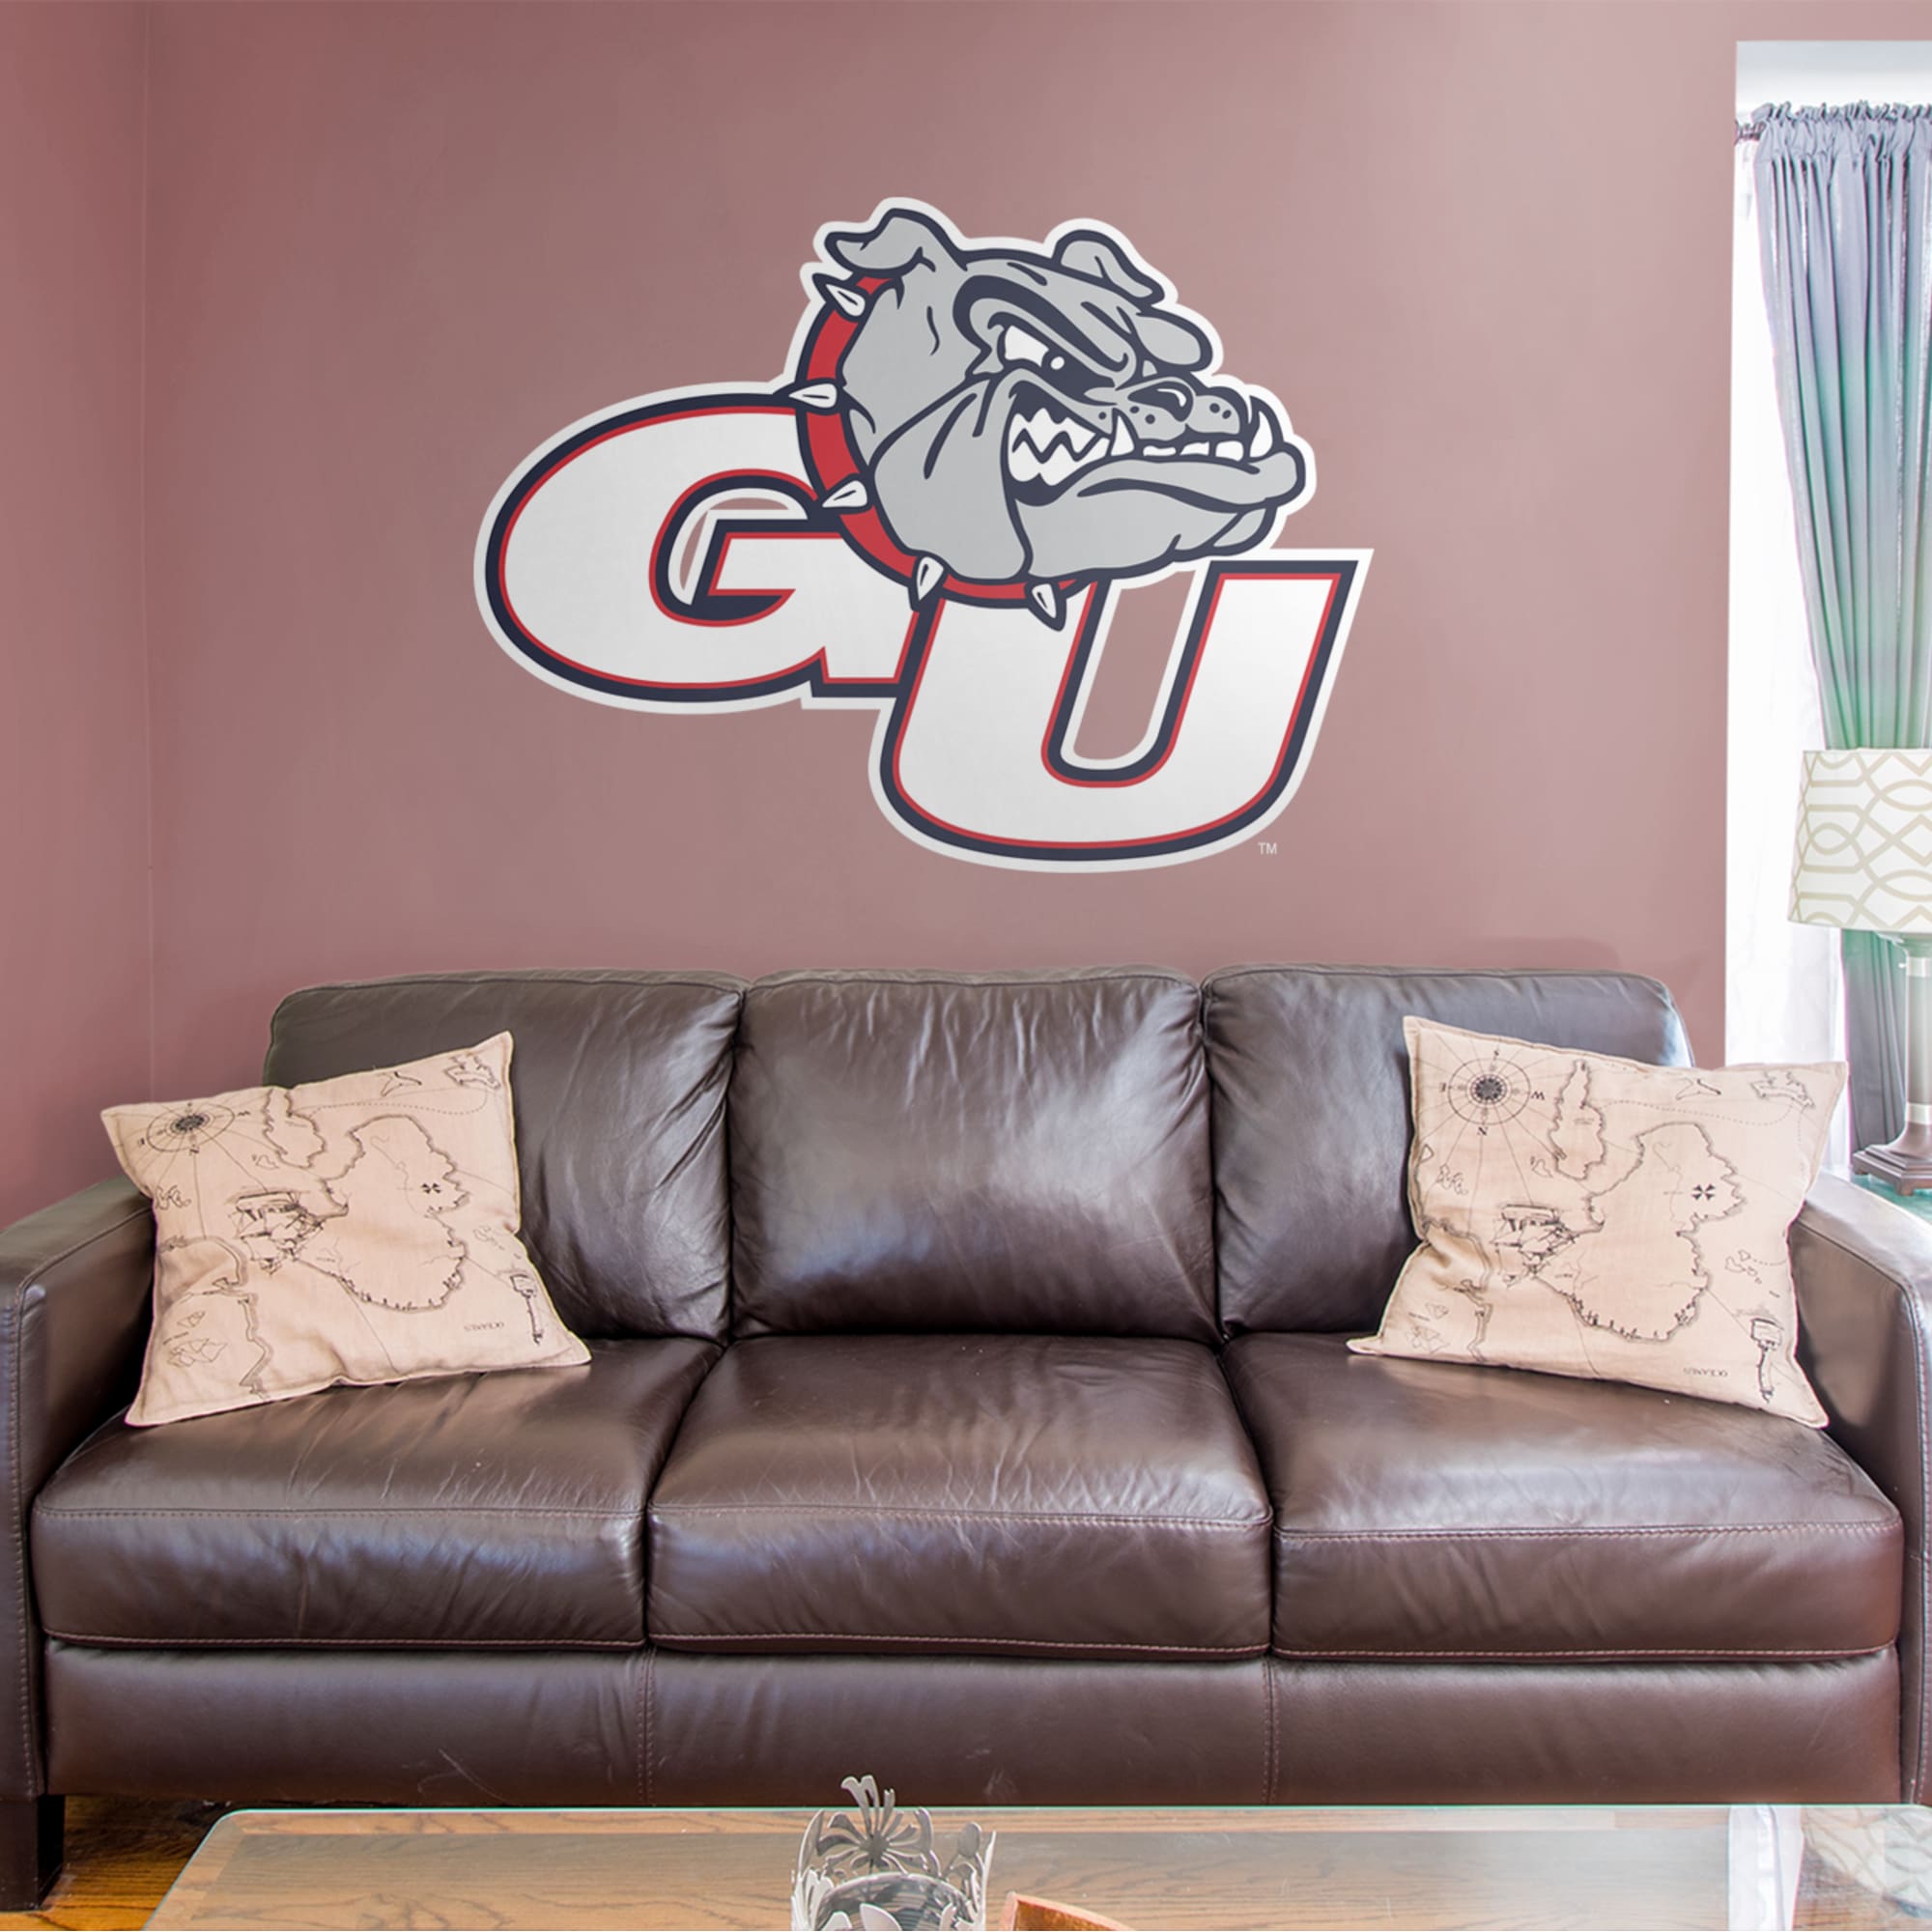 Gonzaga Bulldogs: Logo - Officially Licensed Removable Wall Decal 51.0"W x 38.0"H by Fathead | Vinyl